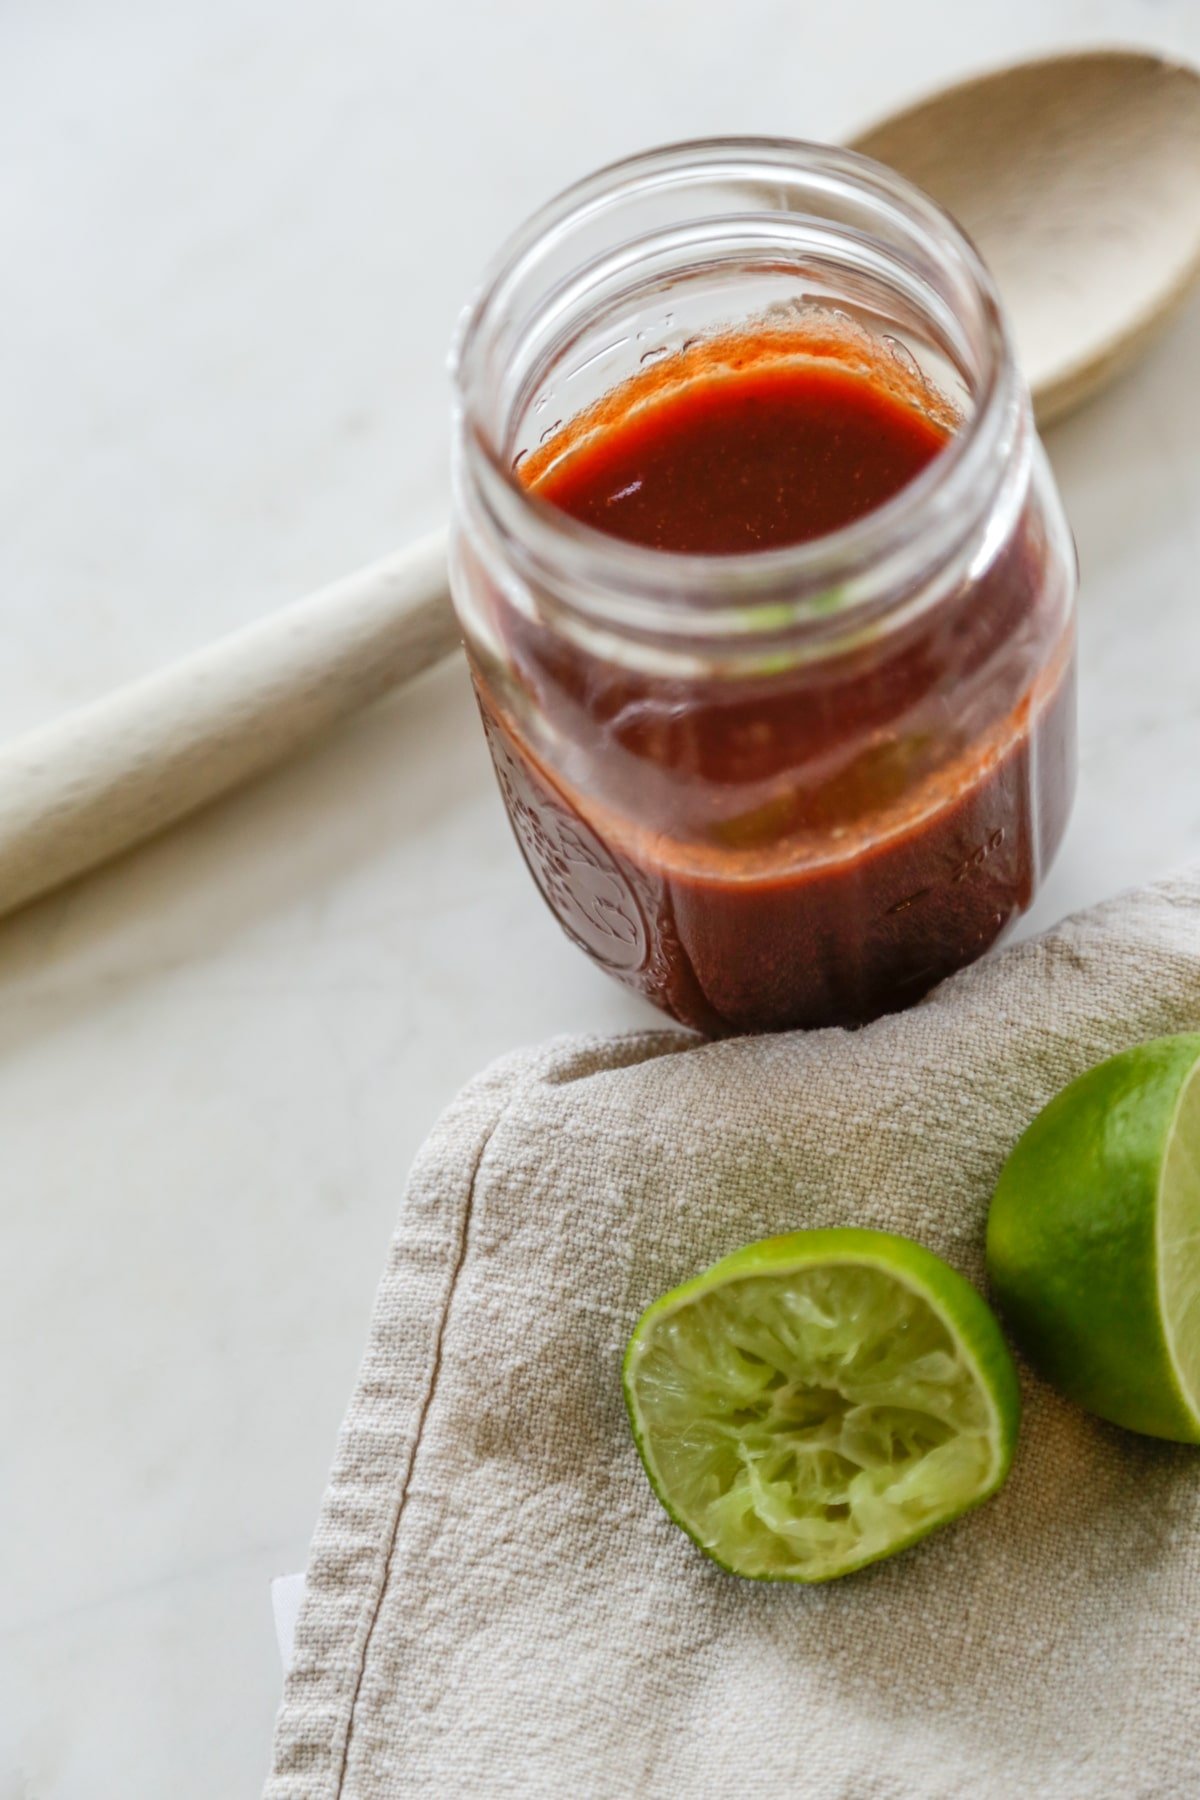 A jar of barbecue sauce with squeezed limes next to it.